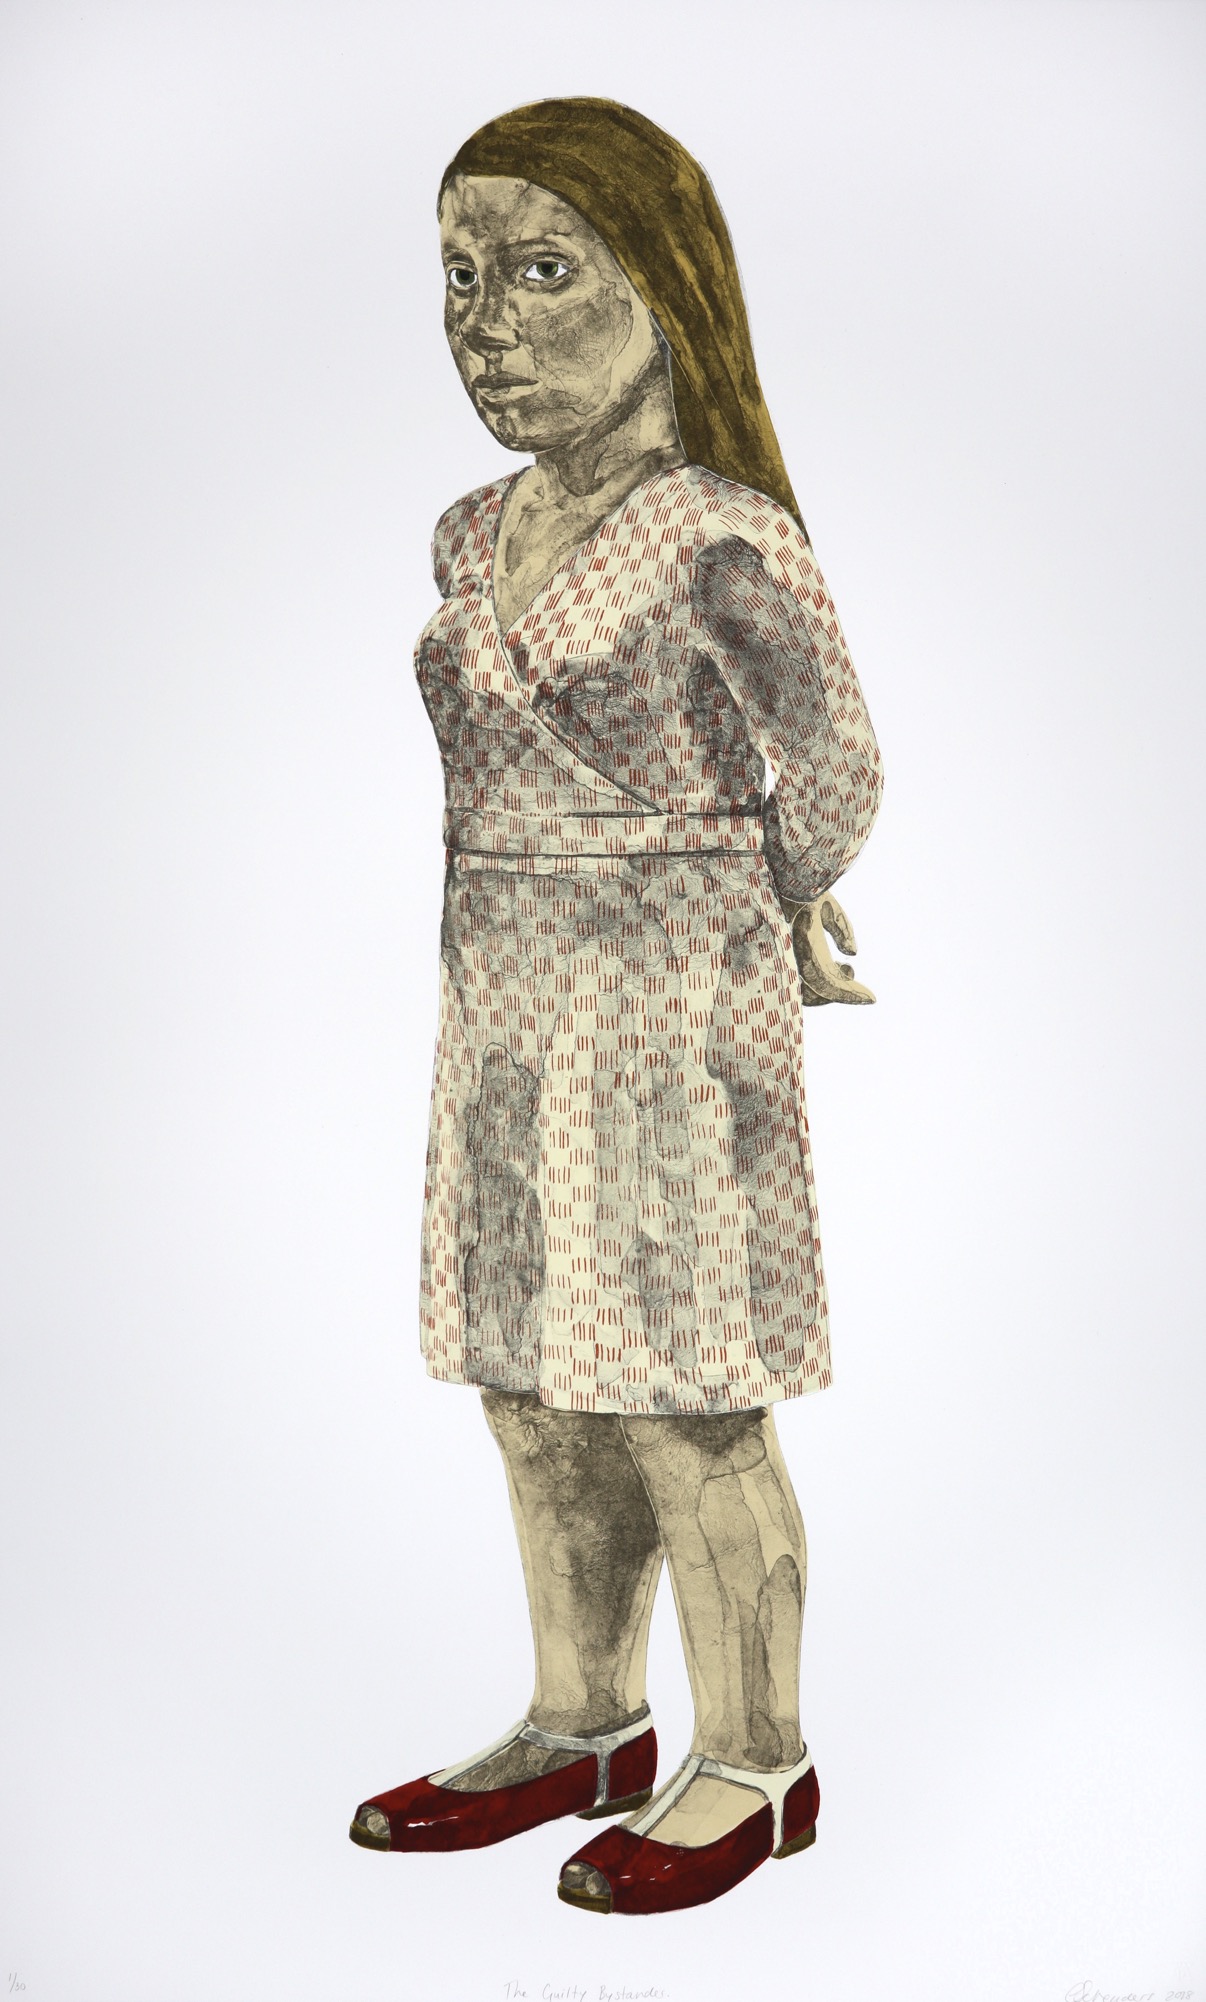 standing woman with her hands clasped behind her back wearing a chequered dress and red shoes